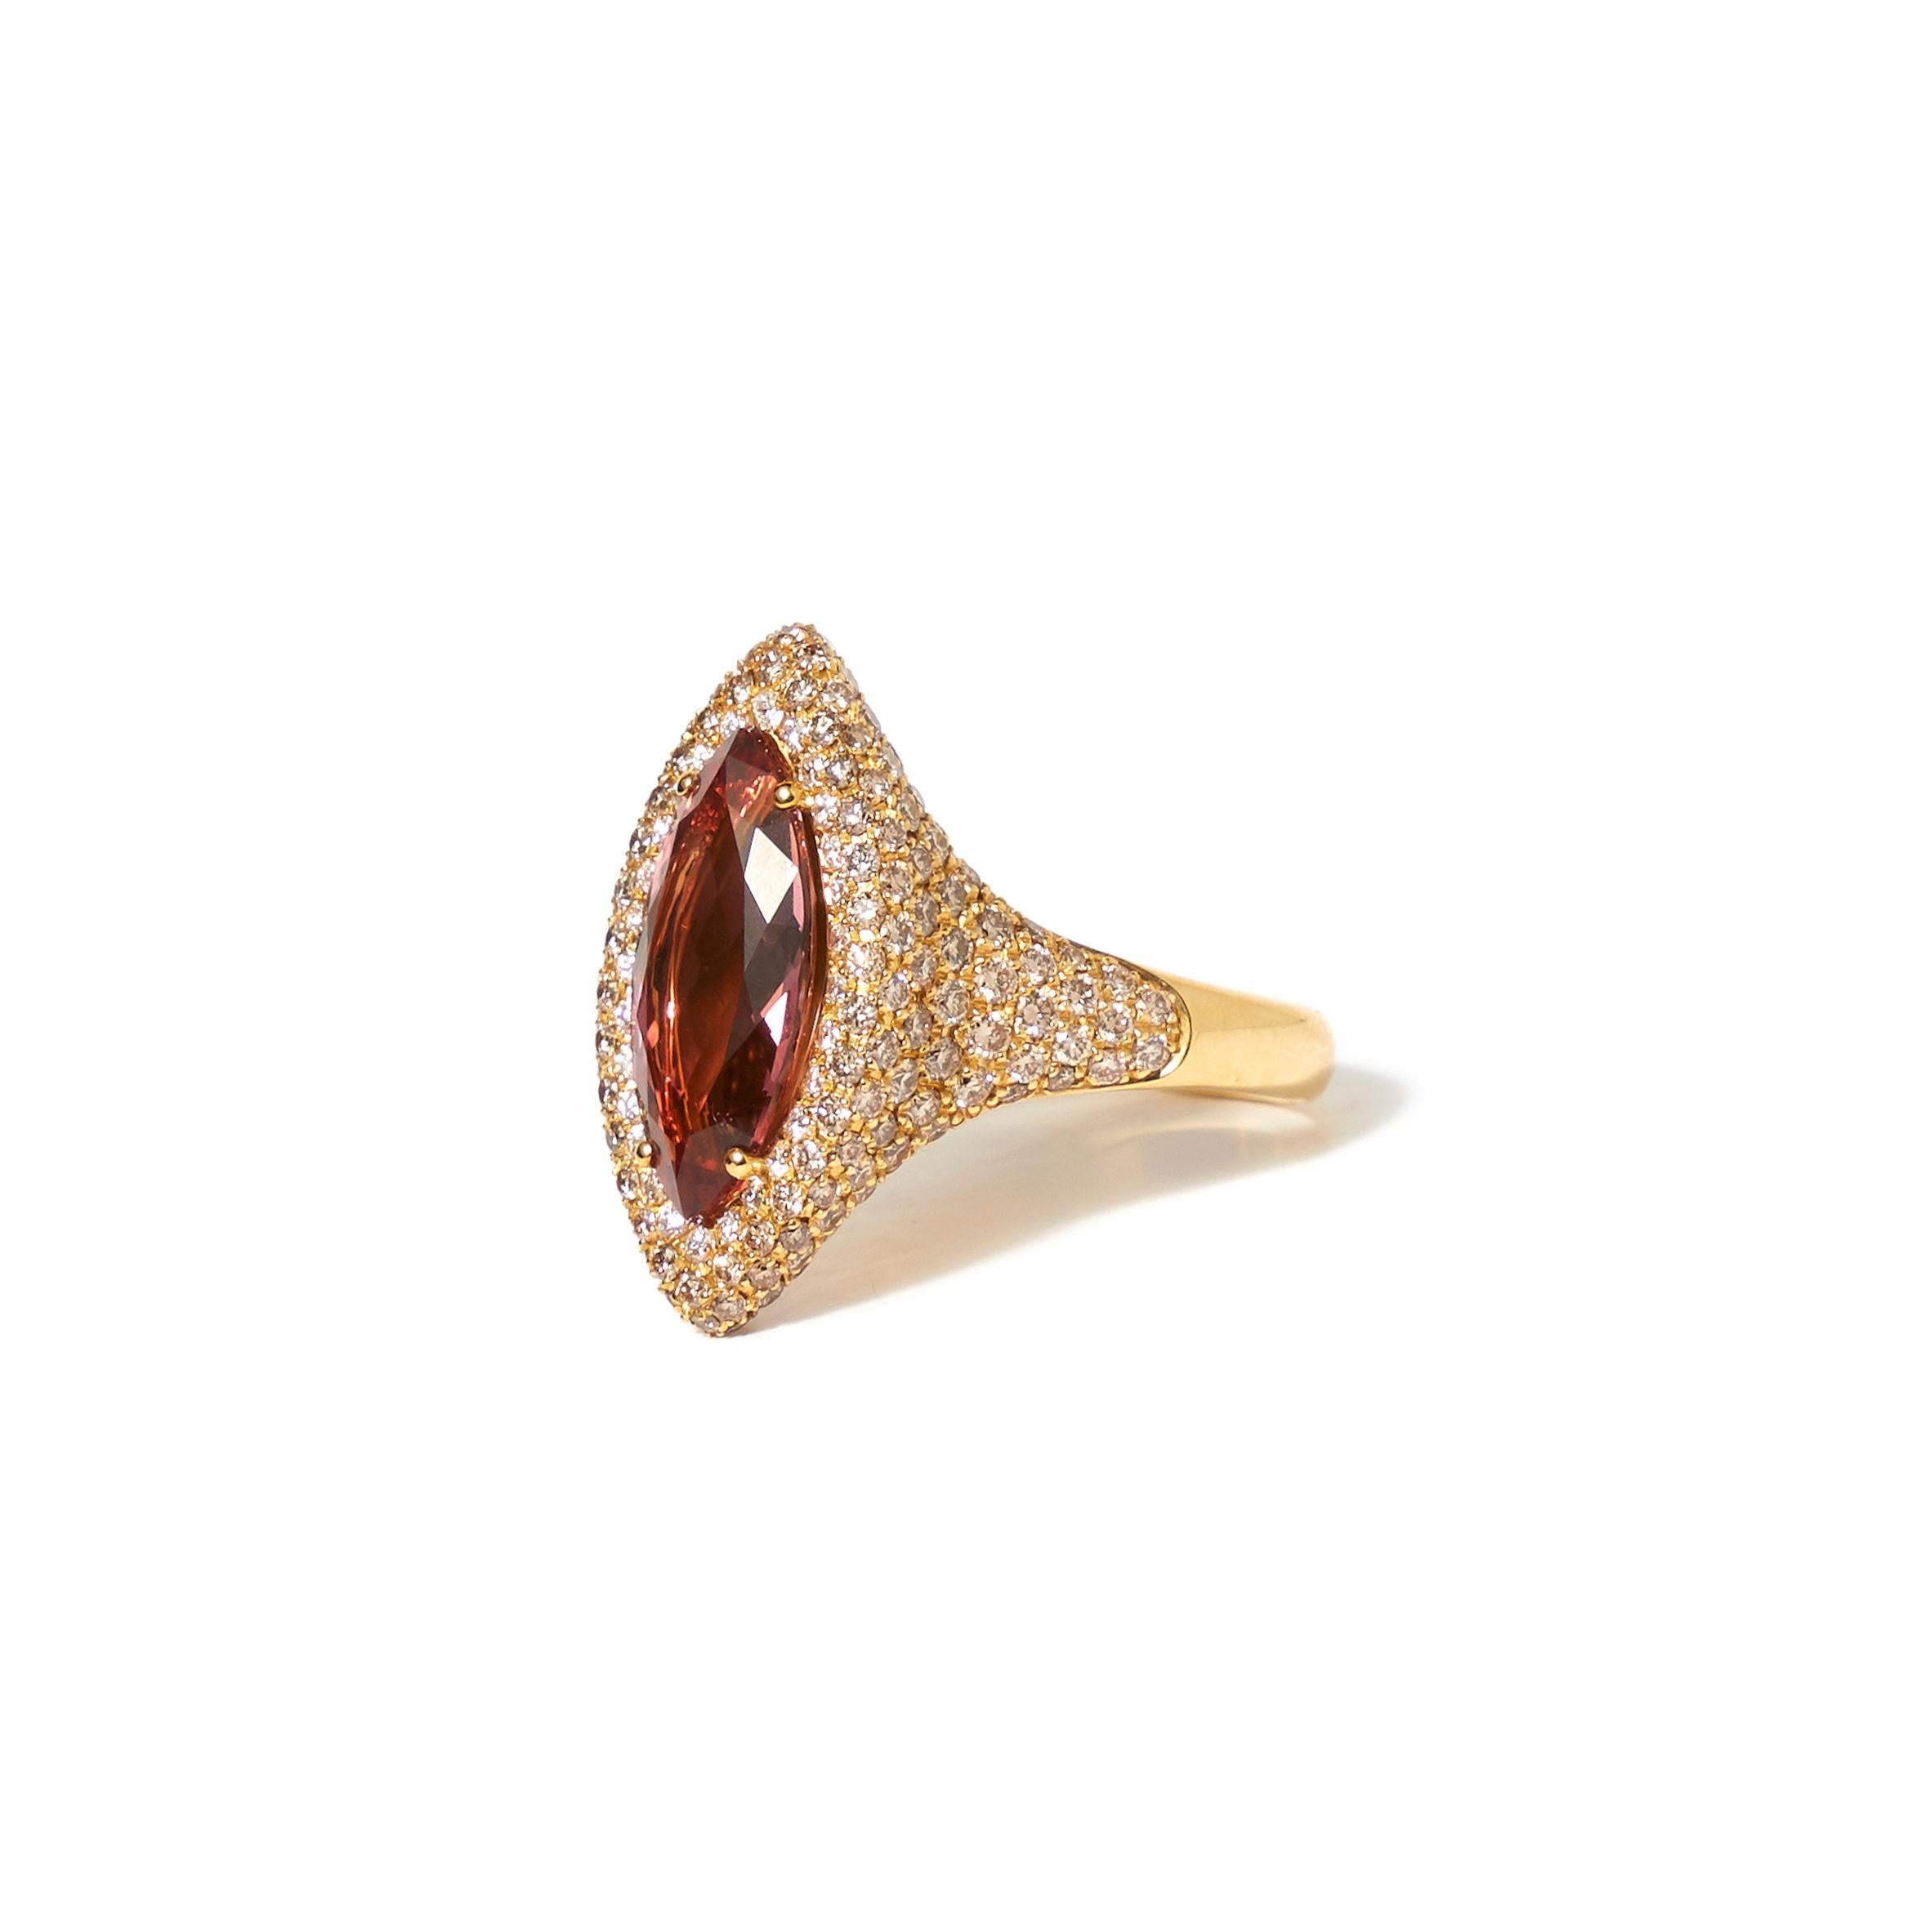 Yellow gold ring set with a navette cut tourmaline and diamonds

Who doesn’t fall for the charm of burgundy red tourmaline? The elegant, almost royal color of this rare tourmaline does not escape anyone’s attention and appeals to the imagination.